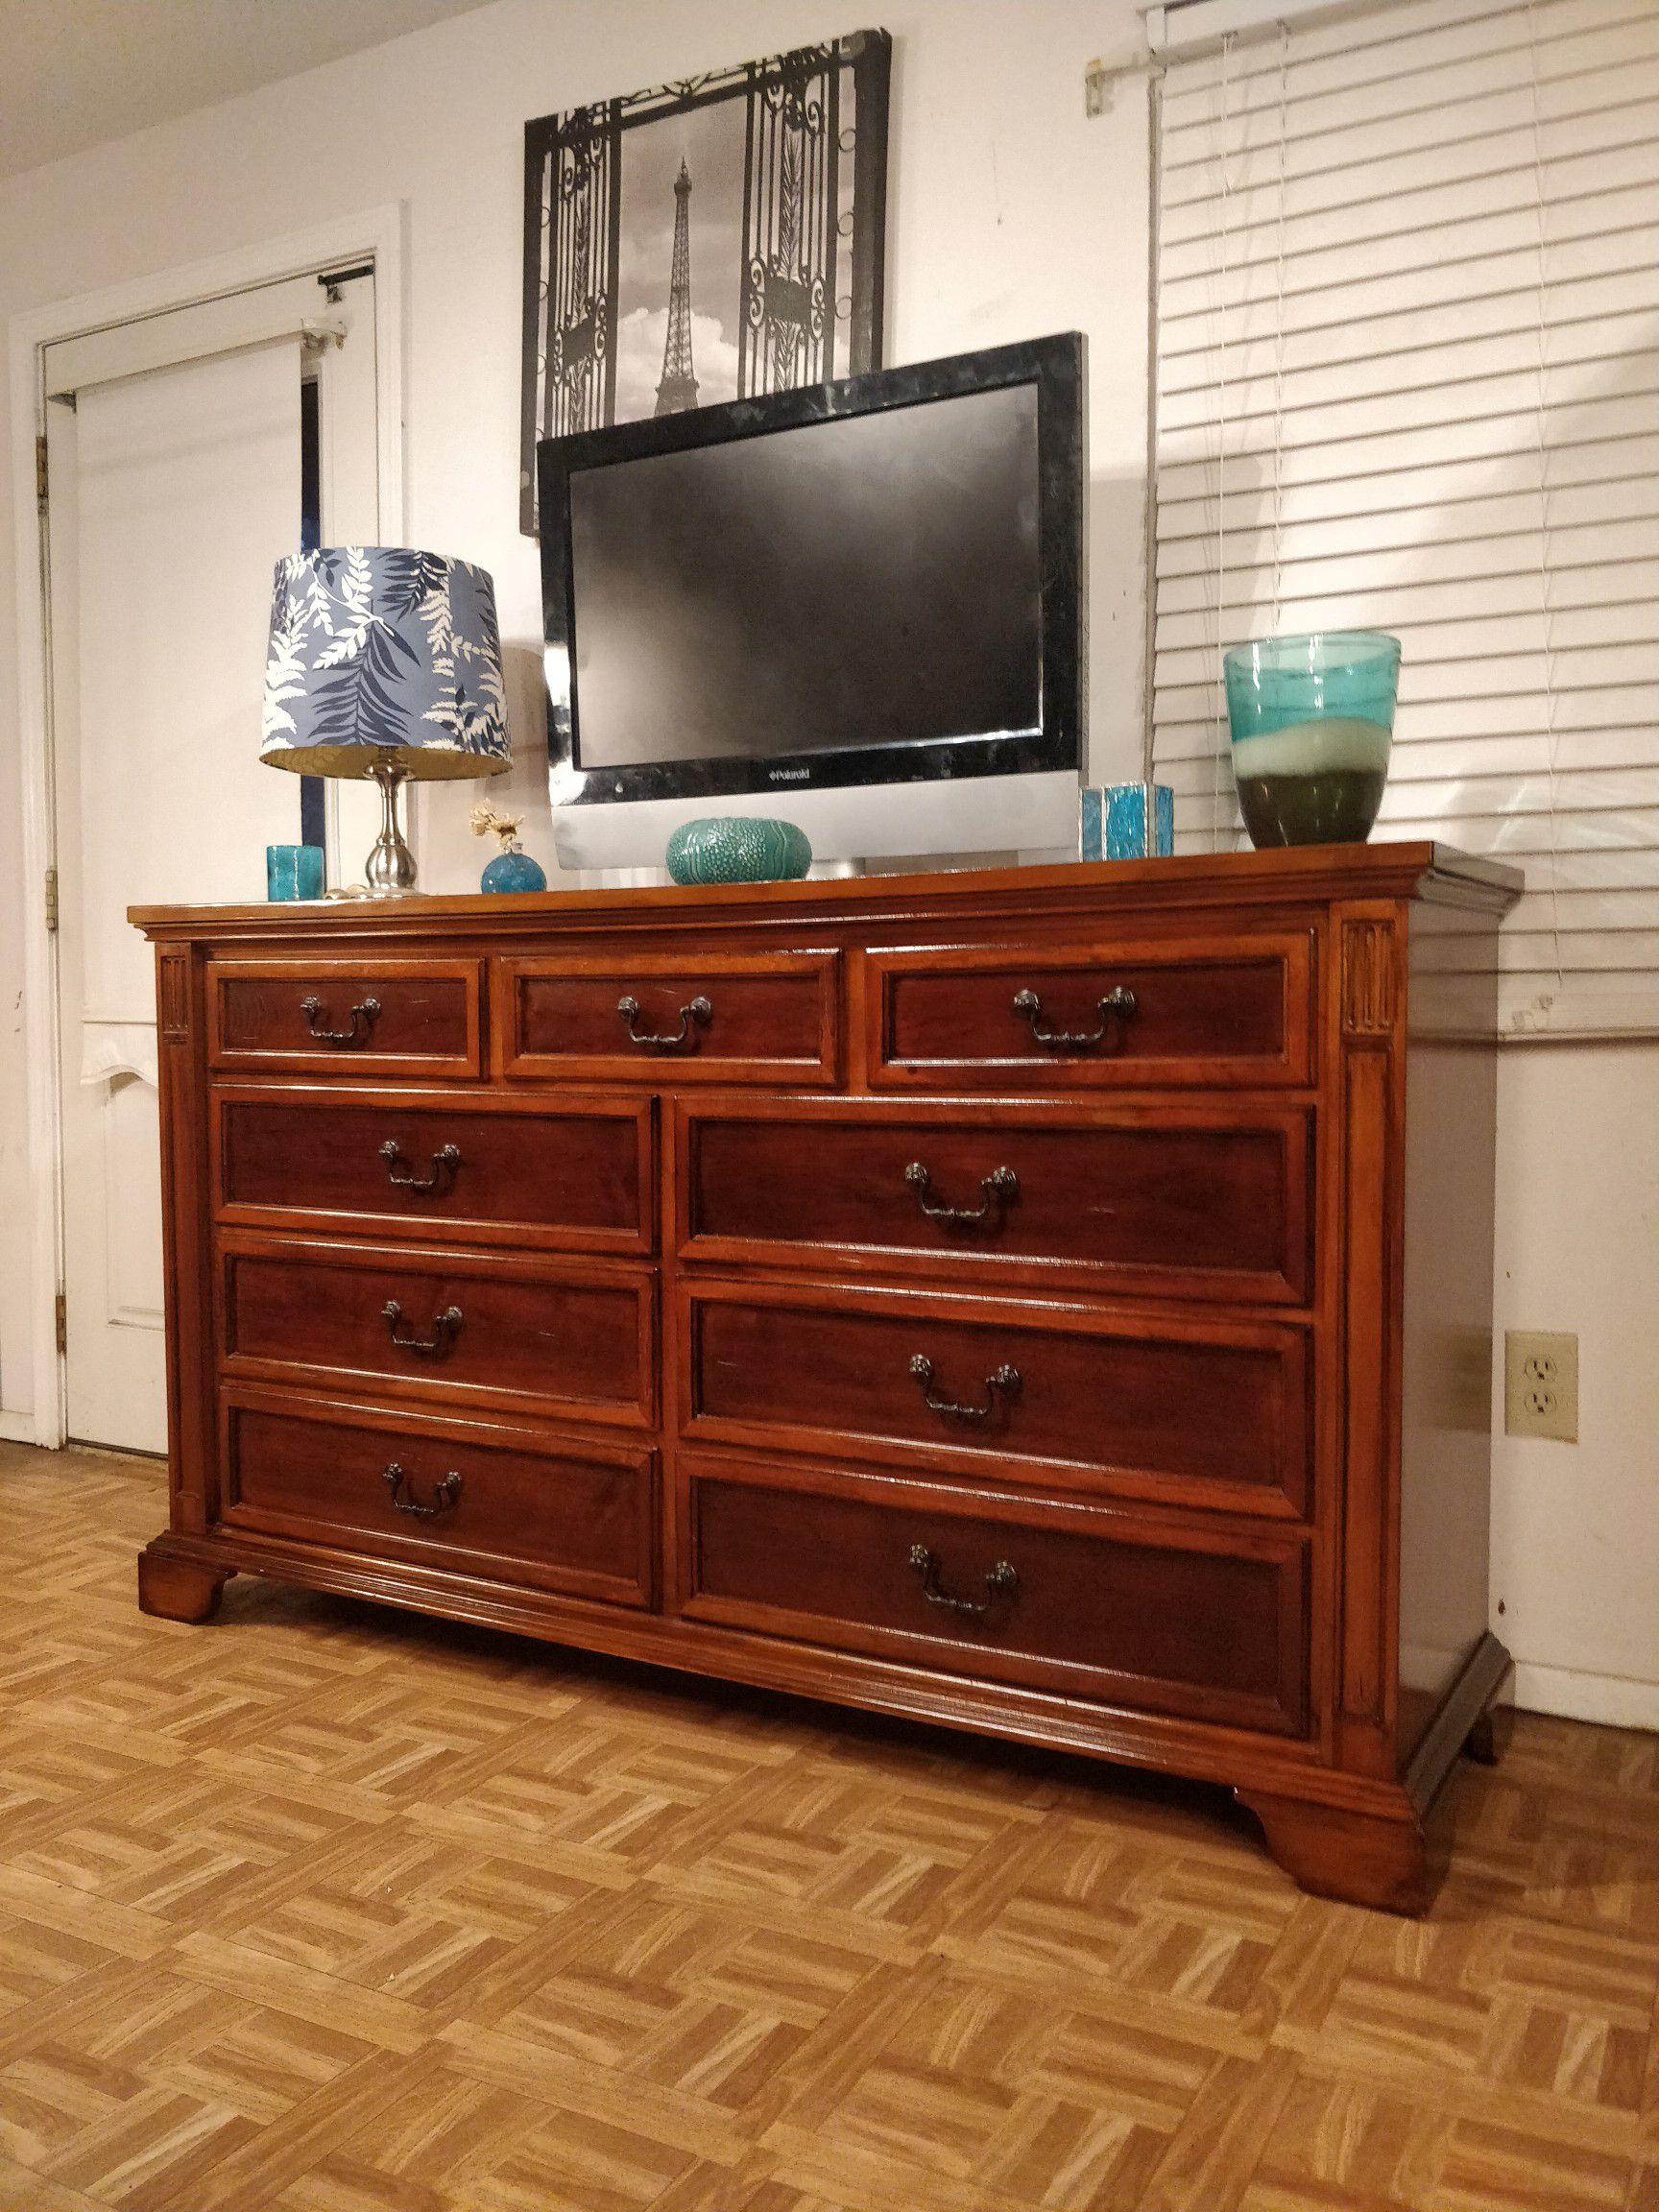 Solid wood UNIVERSAL FURNITURE big dresser/TV stand with 9 drawers in great condition all drawers working well, dovetail drawers, , let me know